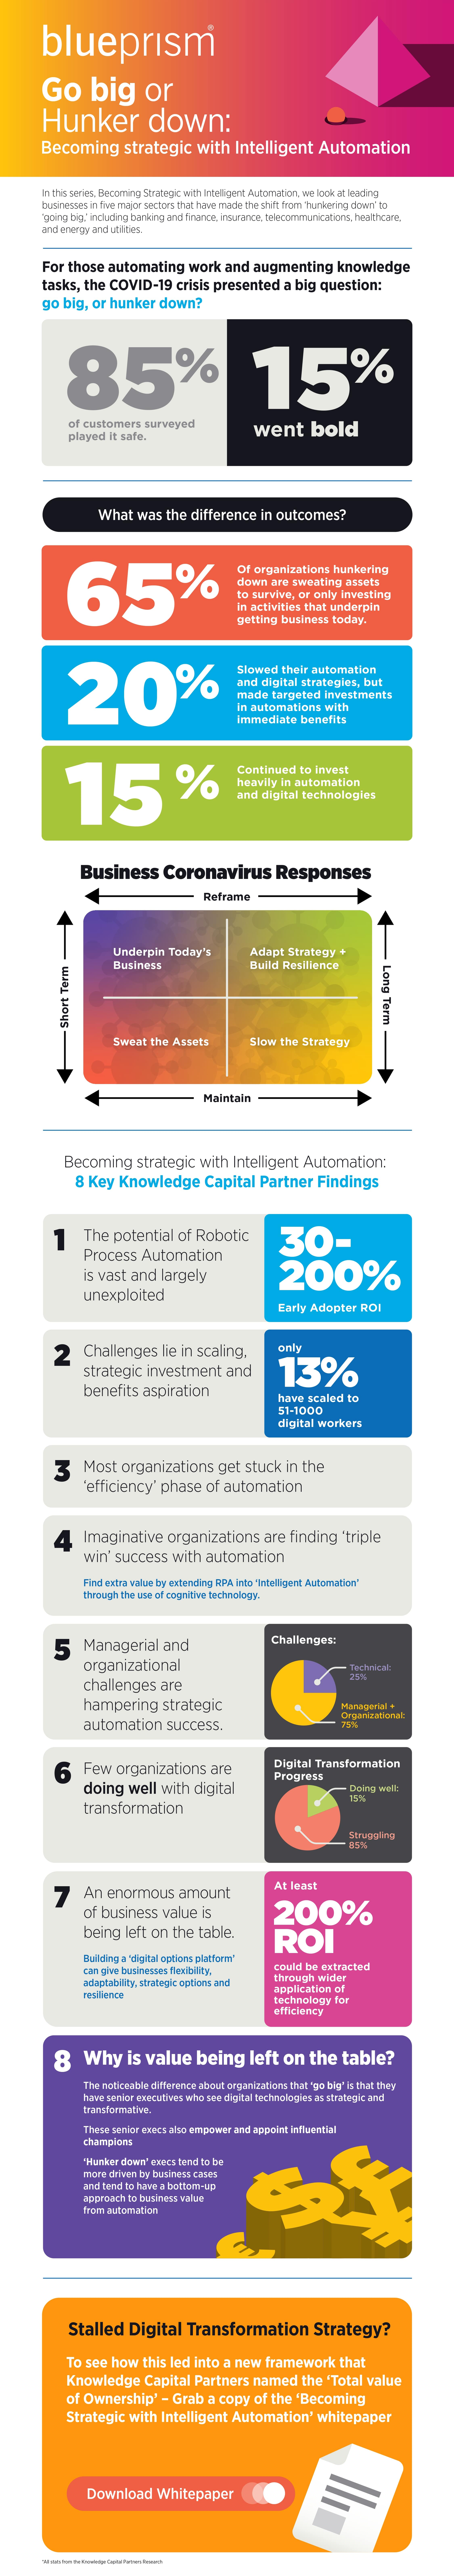 8 Key Findings from Becoming Strategic with Intelligent Automation: Go Big V. Hunker Down Infographic